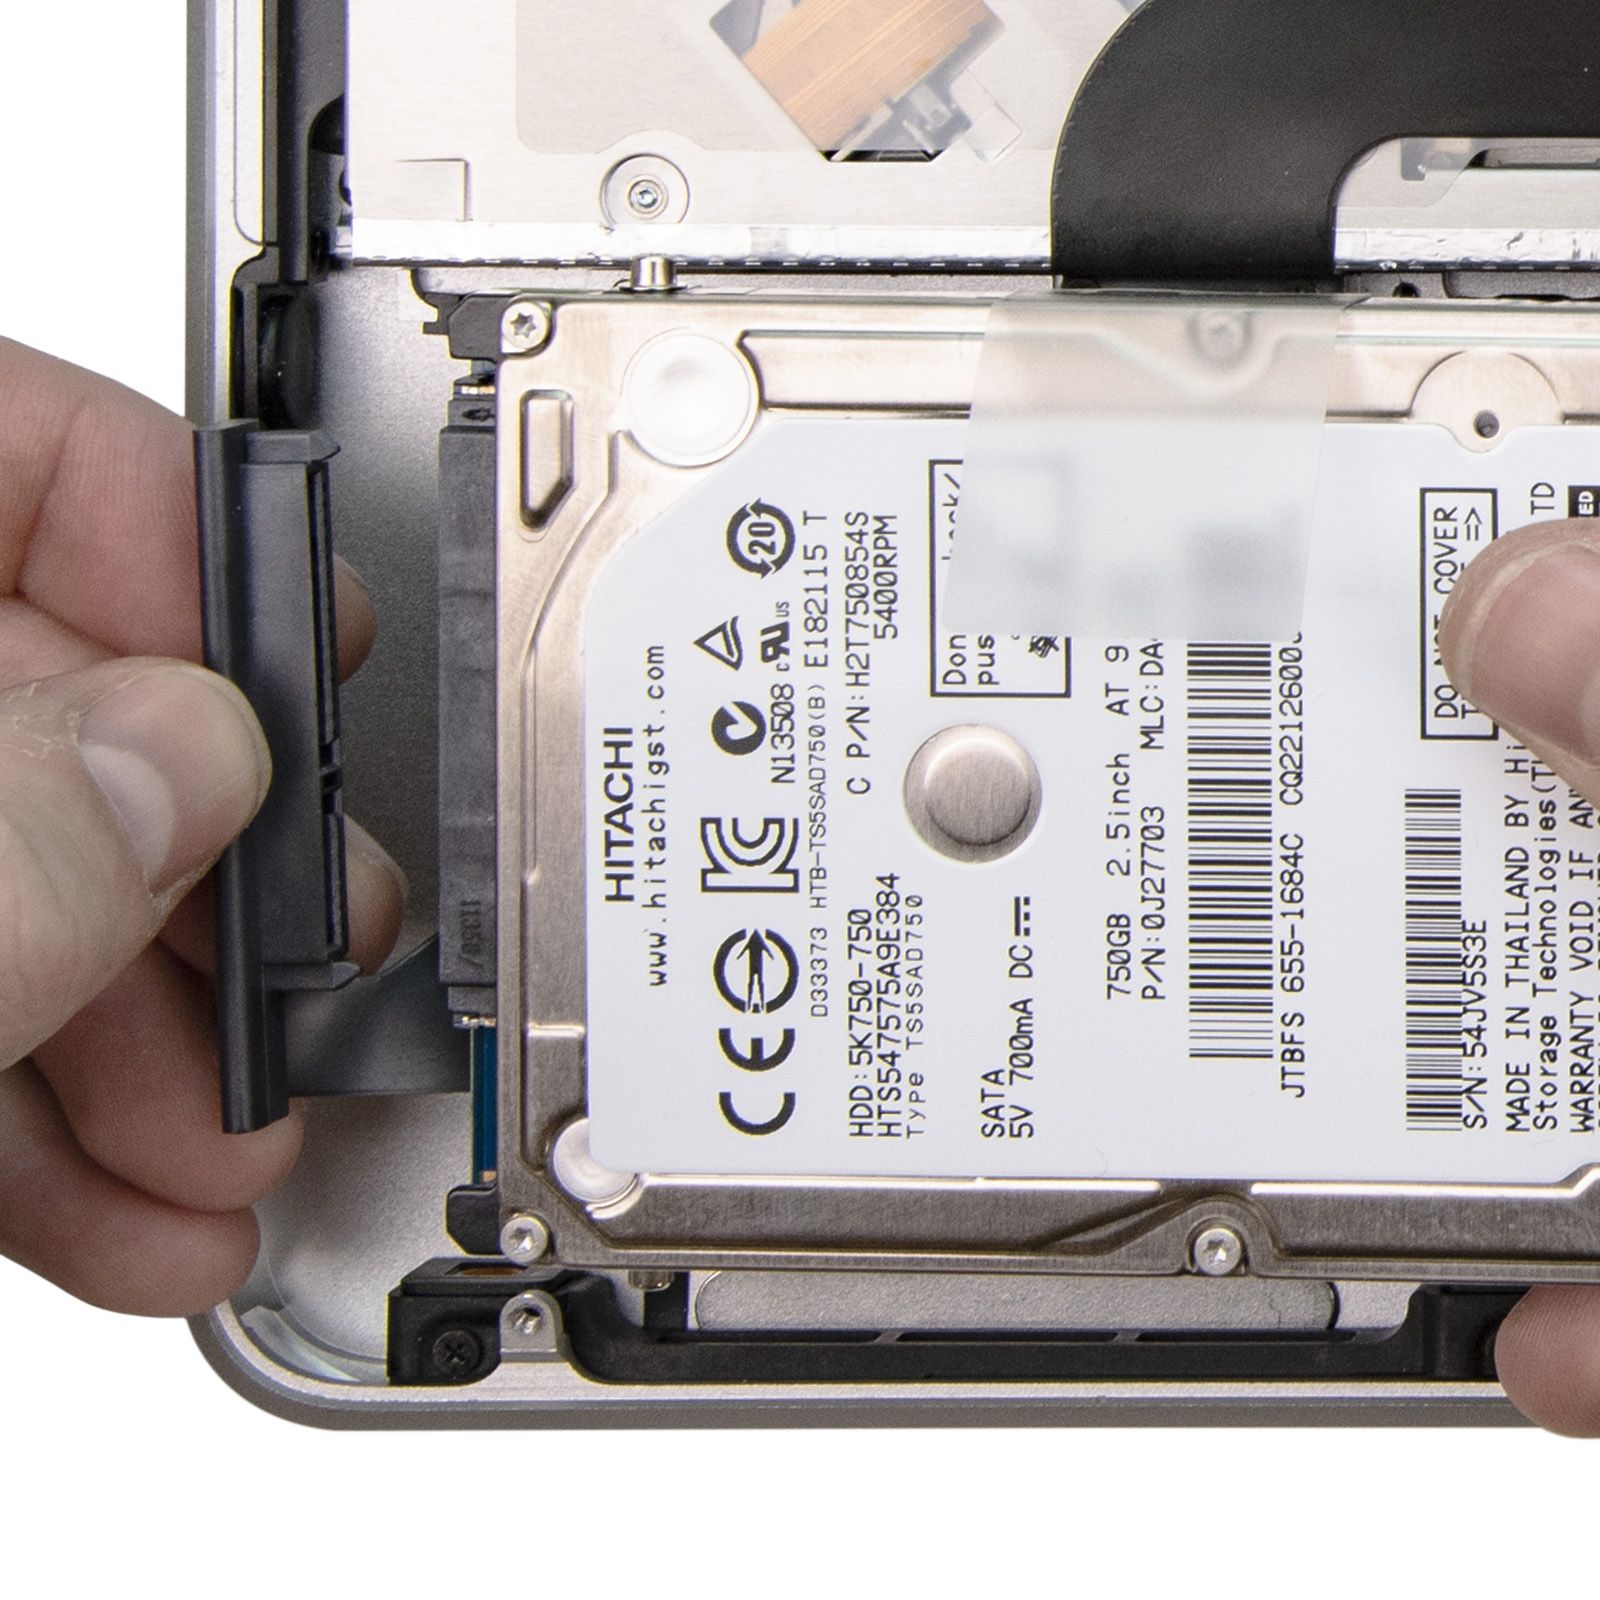 hdd upgrade for 2012 mac book pro